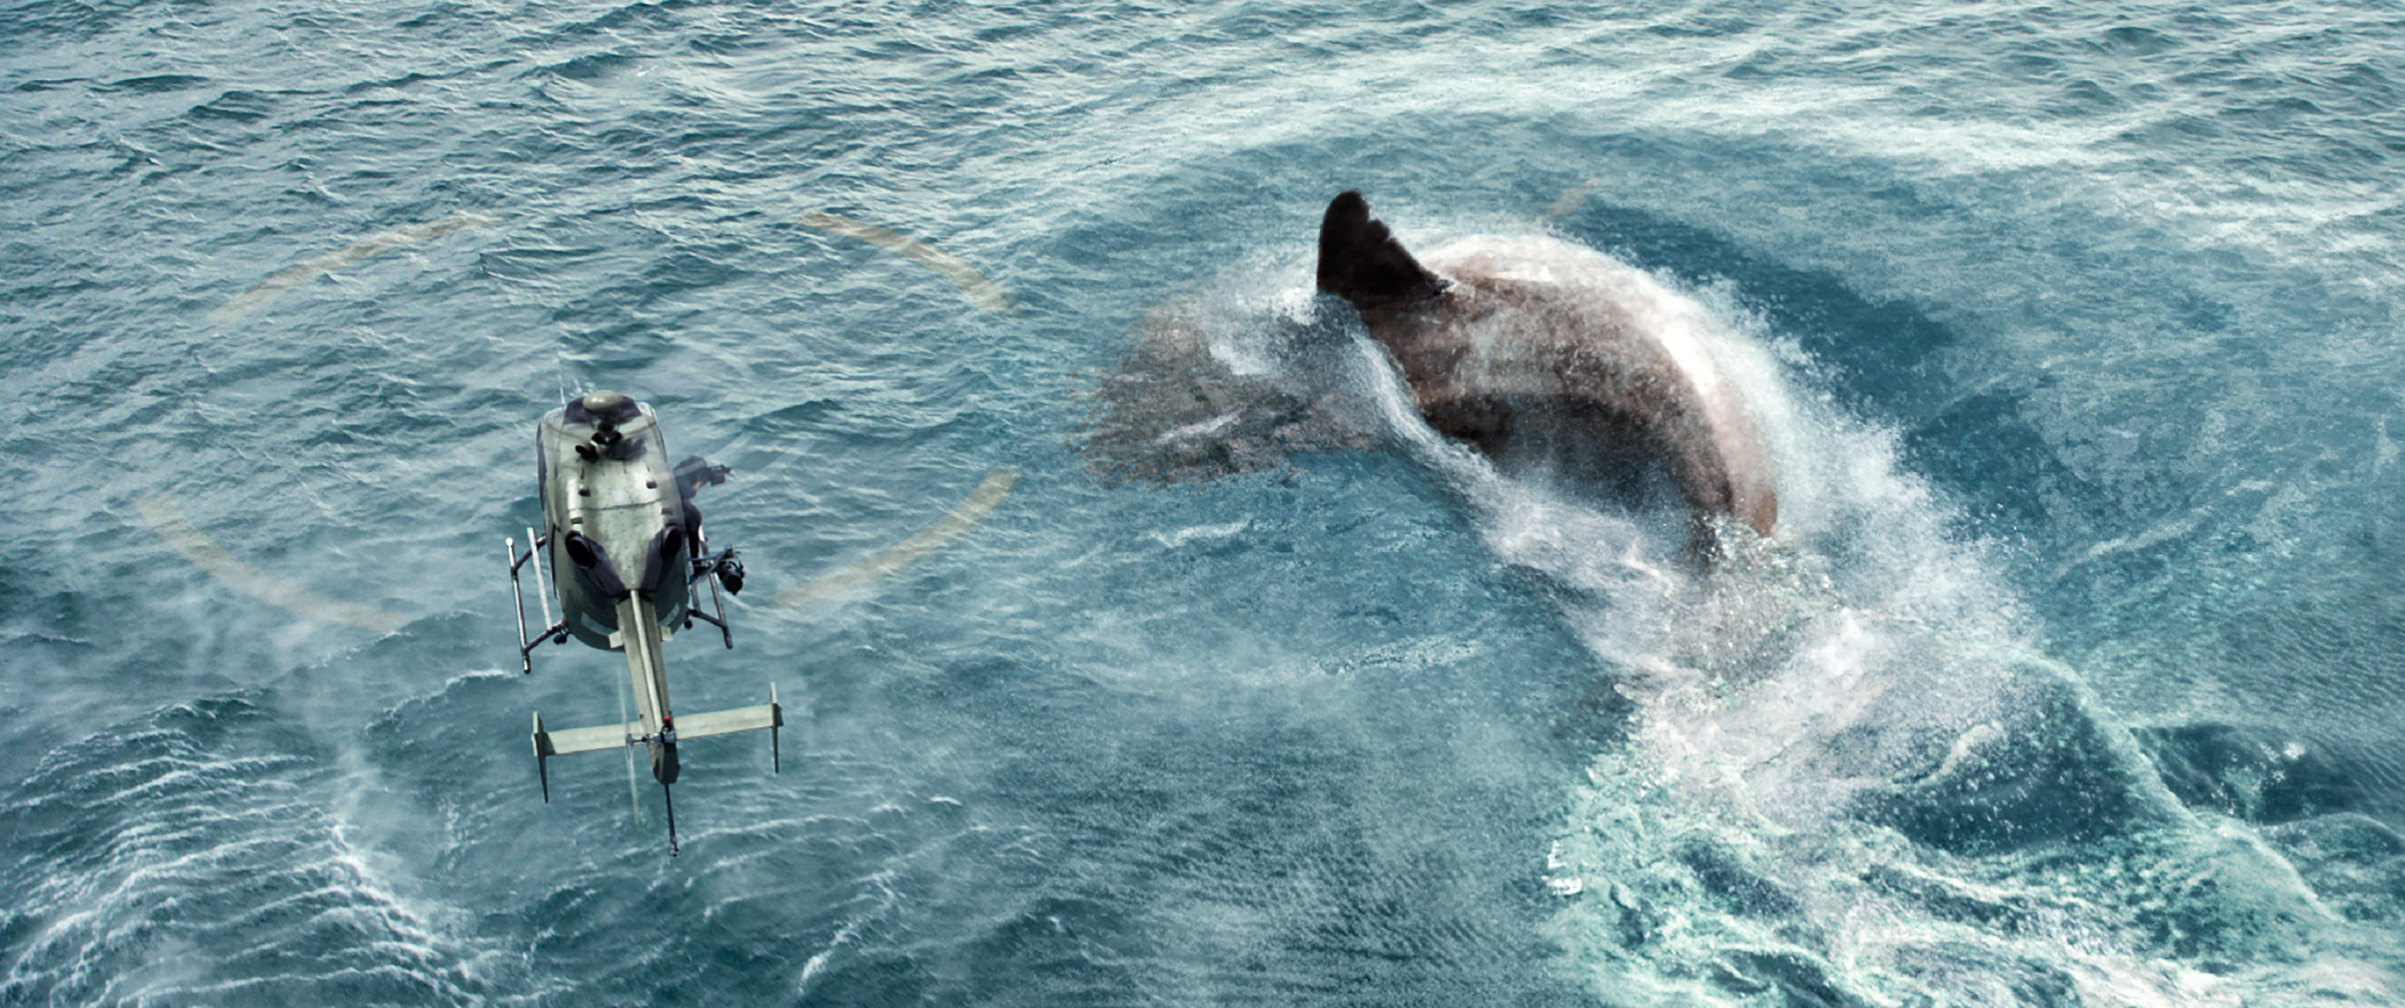 Megabeast: helicopters are no match for an angry prehistoric shark in The Meg (Warner Bros)